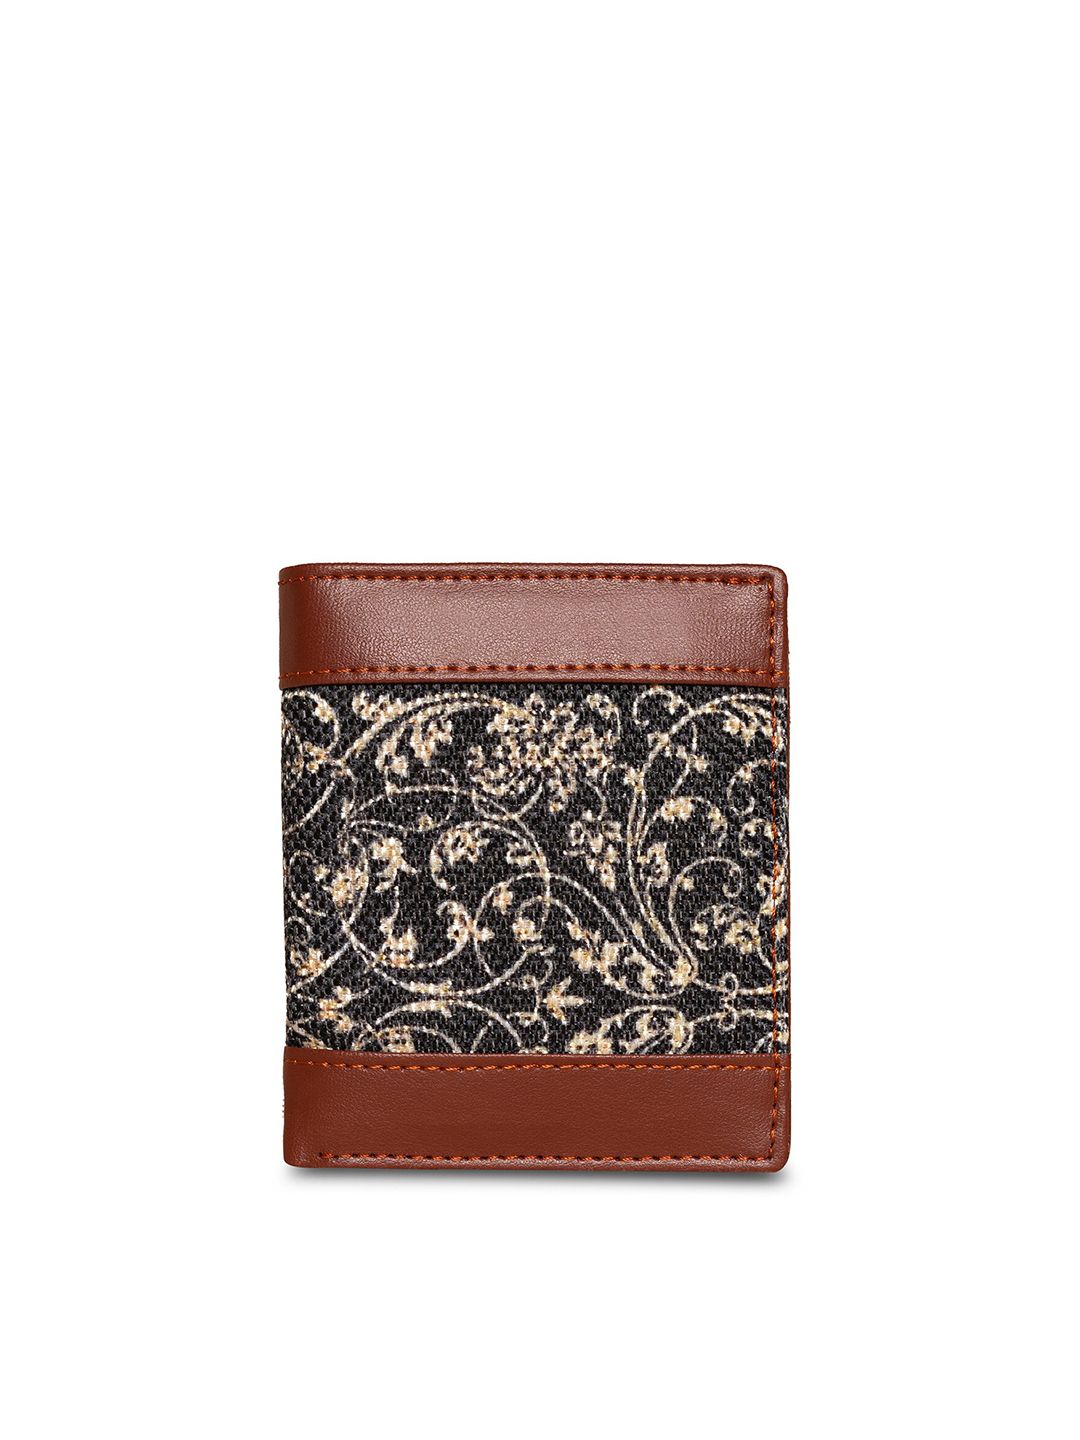 ZOUK Women Black & Brown Floral Printed Two Fold Wallet Price in India